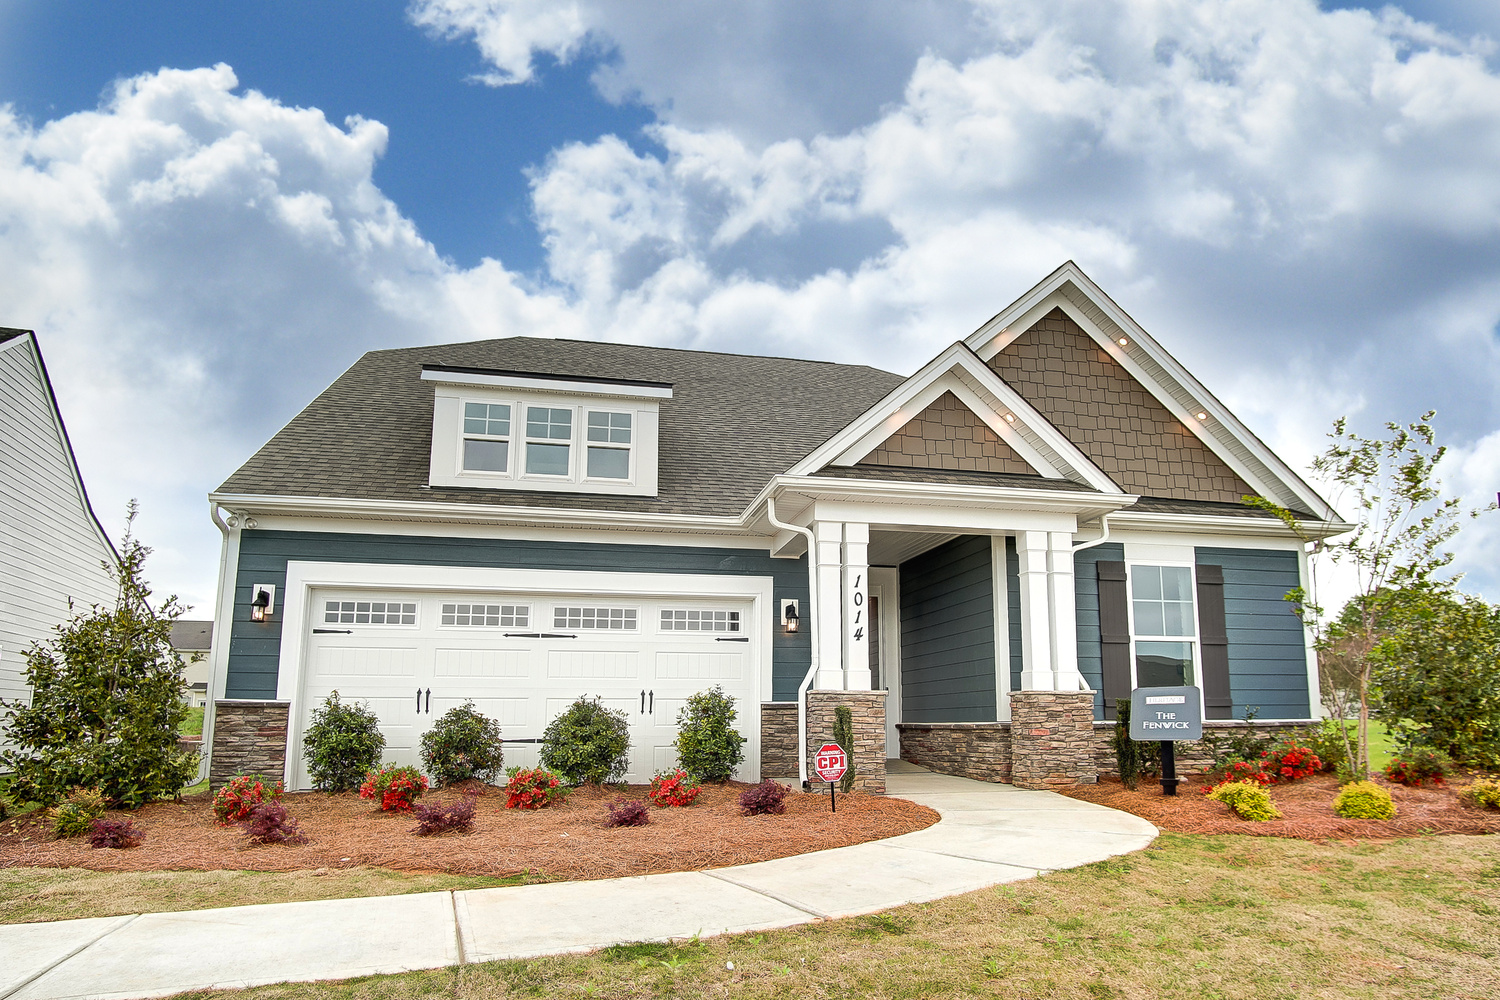 Villas at Prestwick New Construction Home For Sale In Mooresville